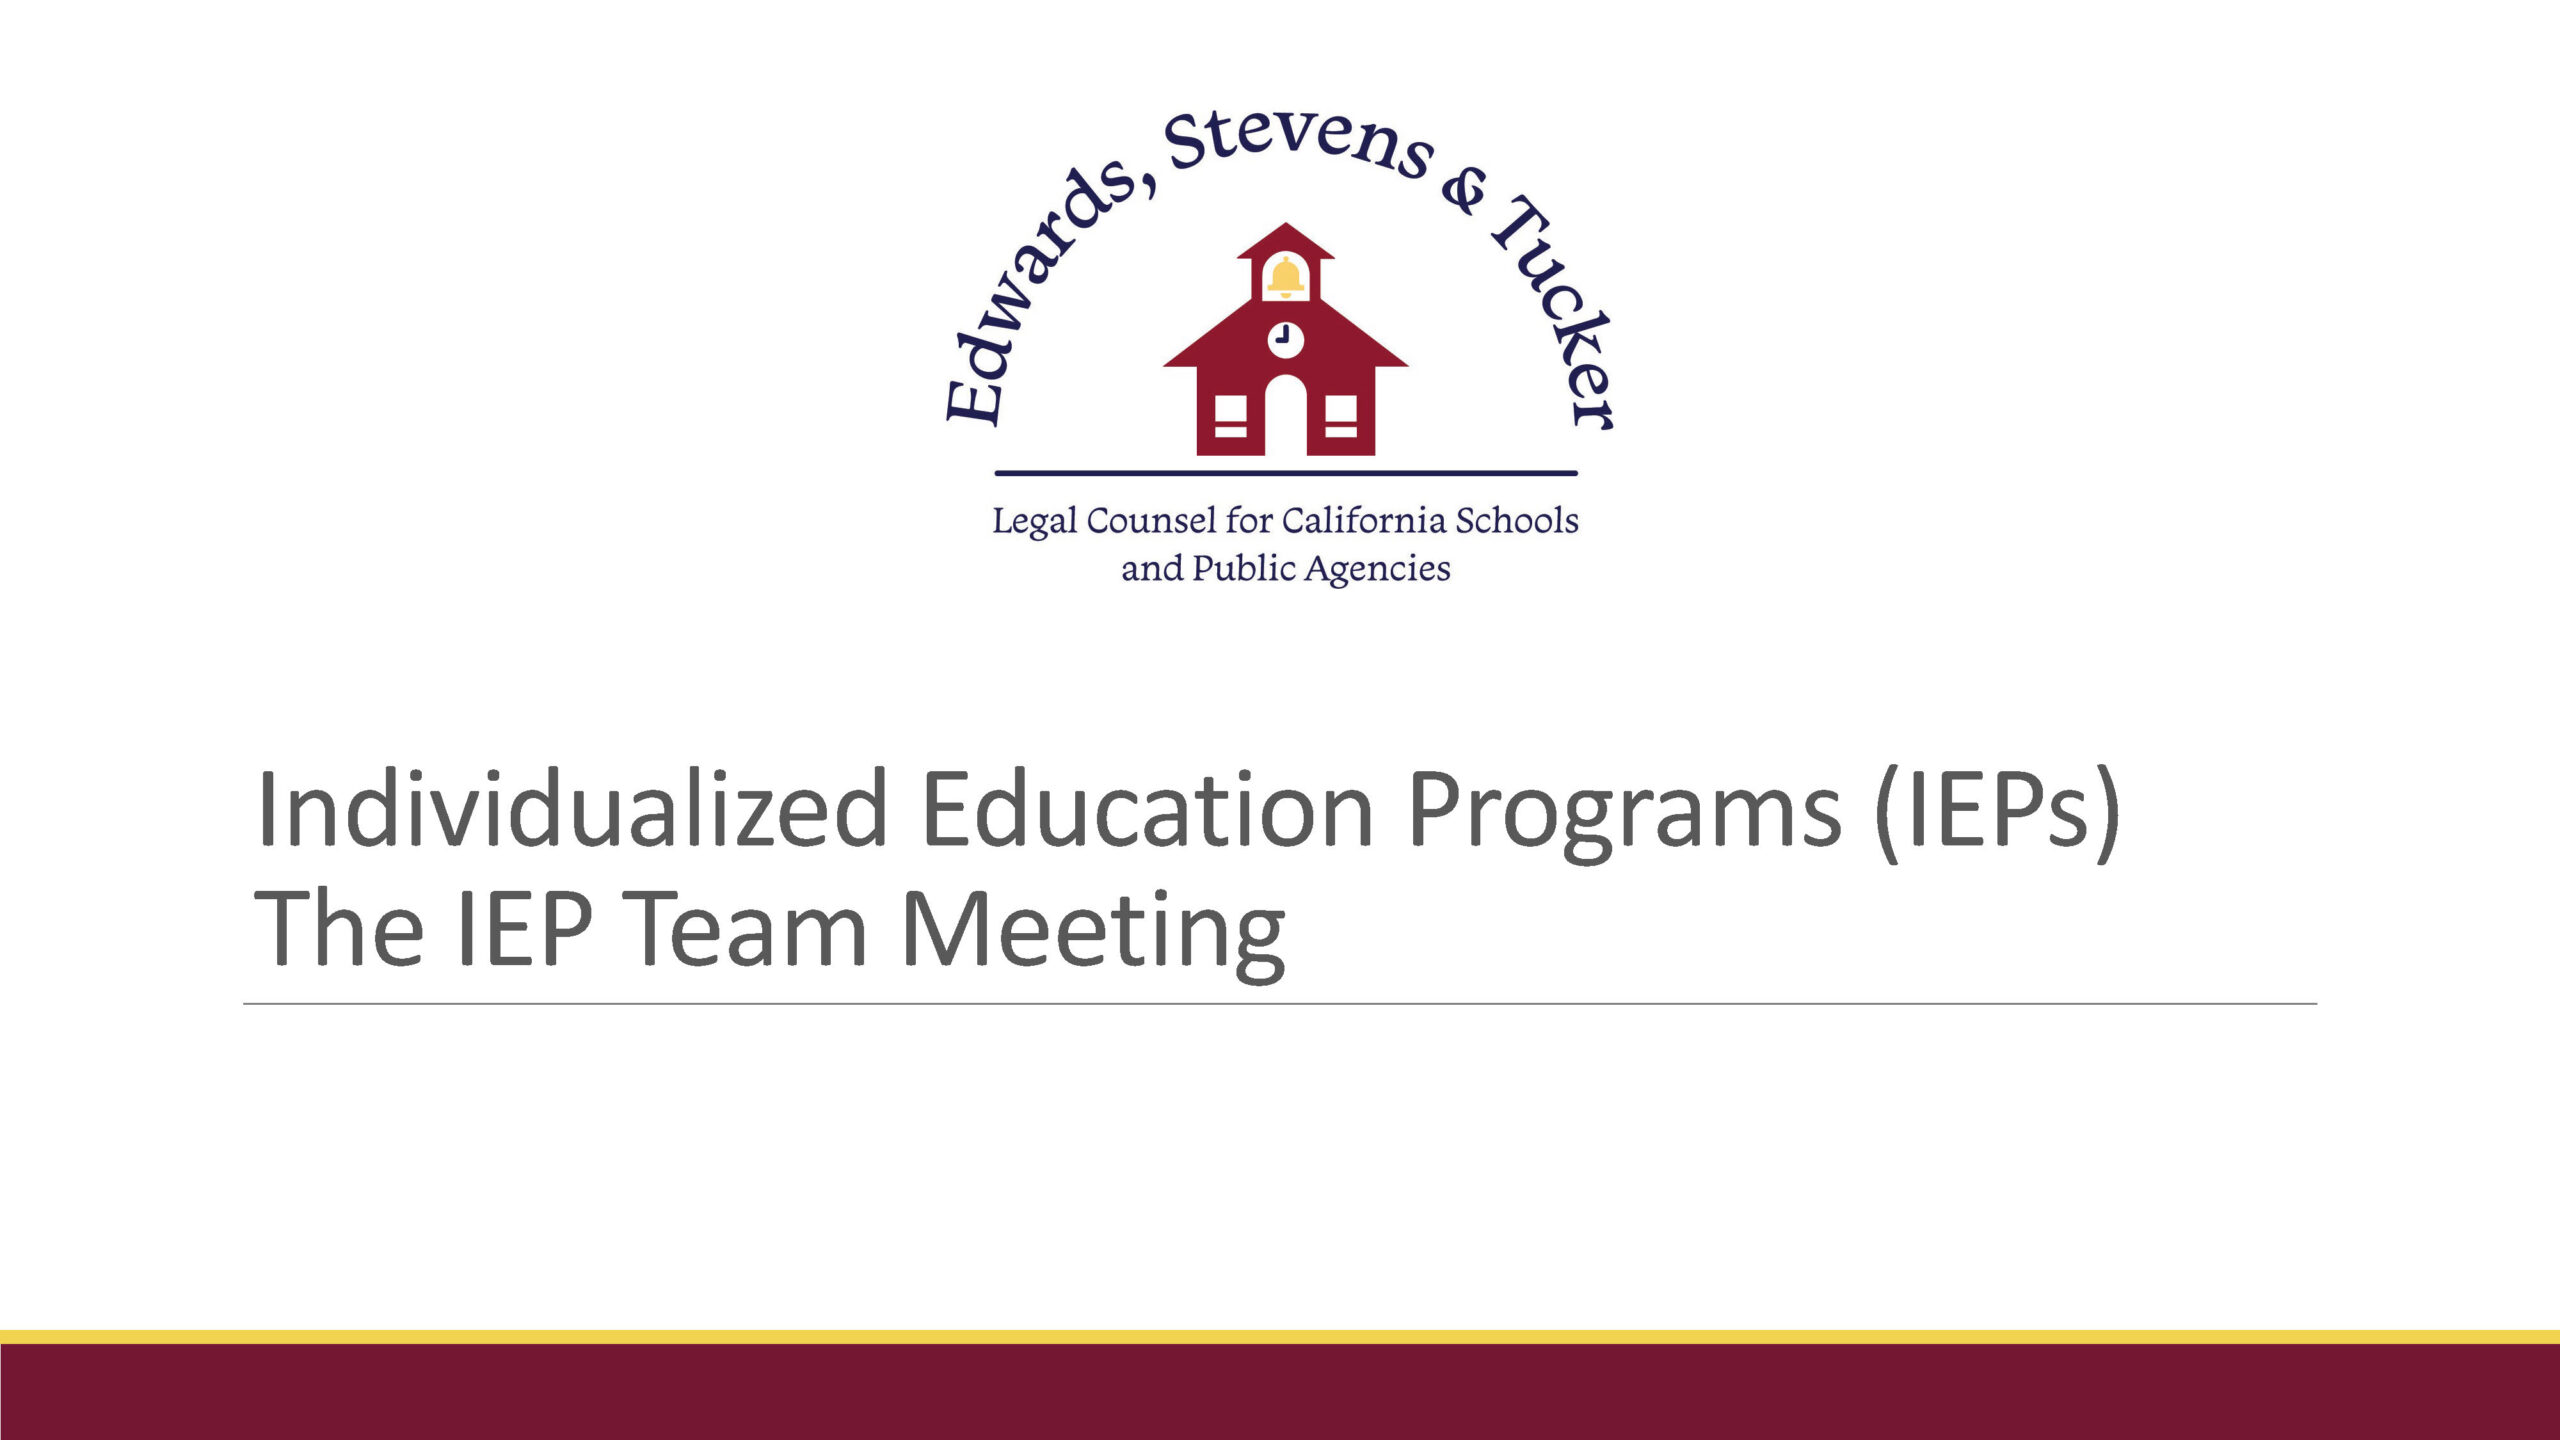 Individualized Education Programs (IEPs): The IEP Team Meeting